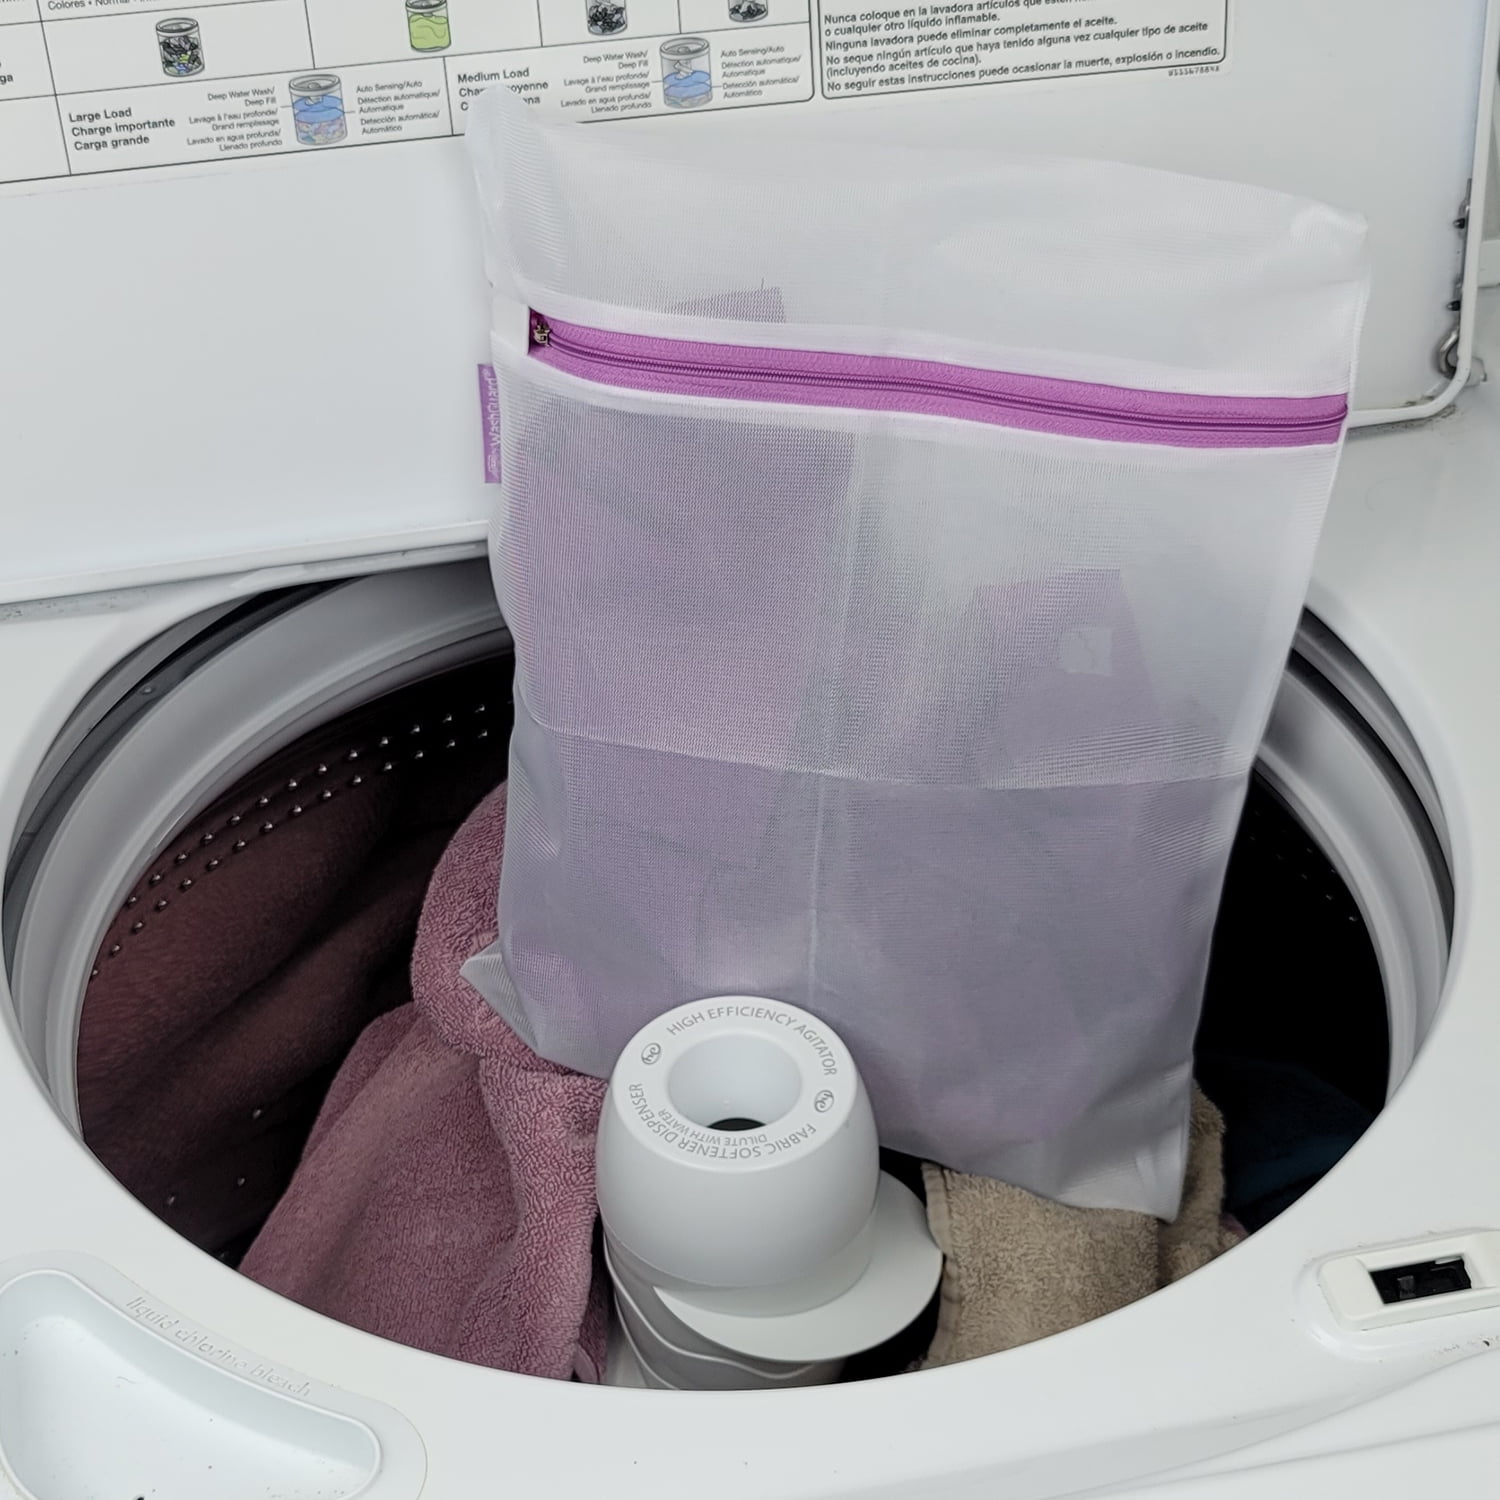 1pc Bra Laundry Bag Washing Machine Specialized Mesh Wash Bags, Thickened  Type, Cord Locked, Bra Washer Protector